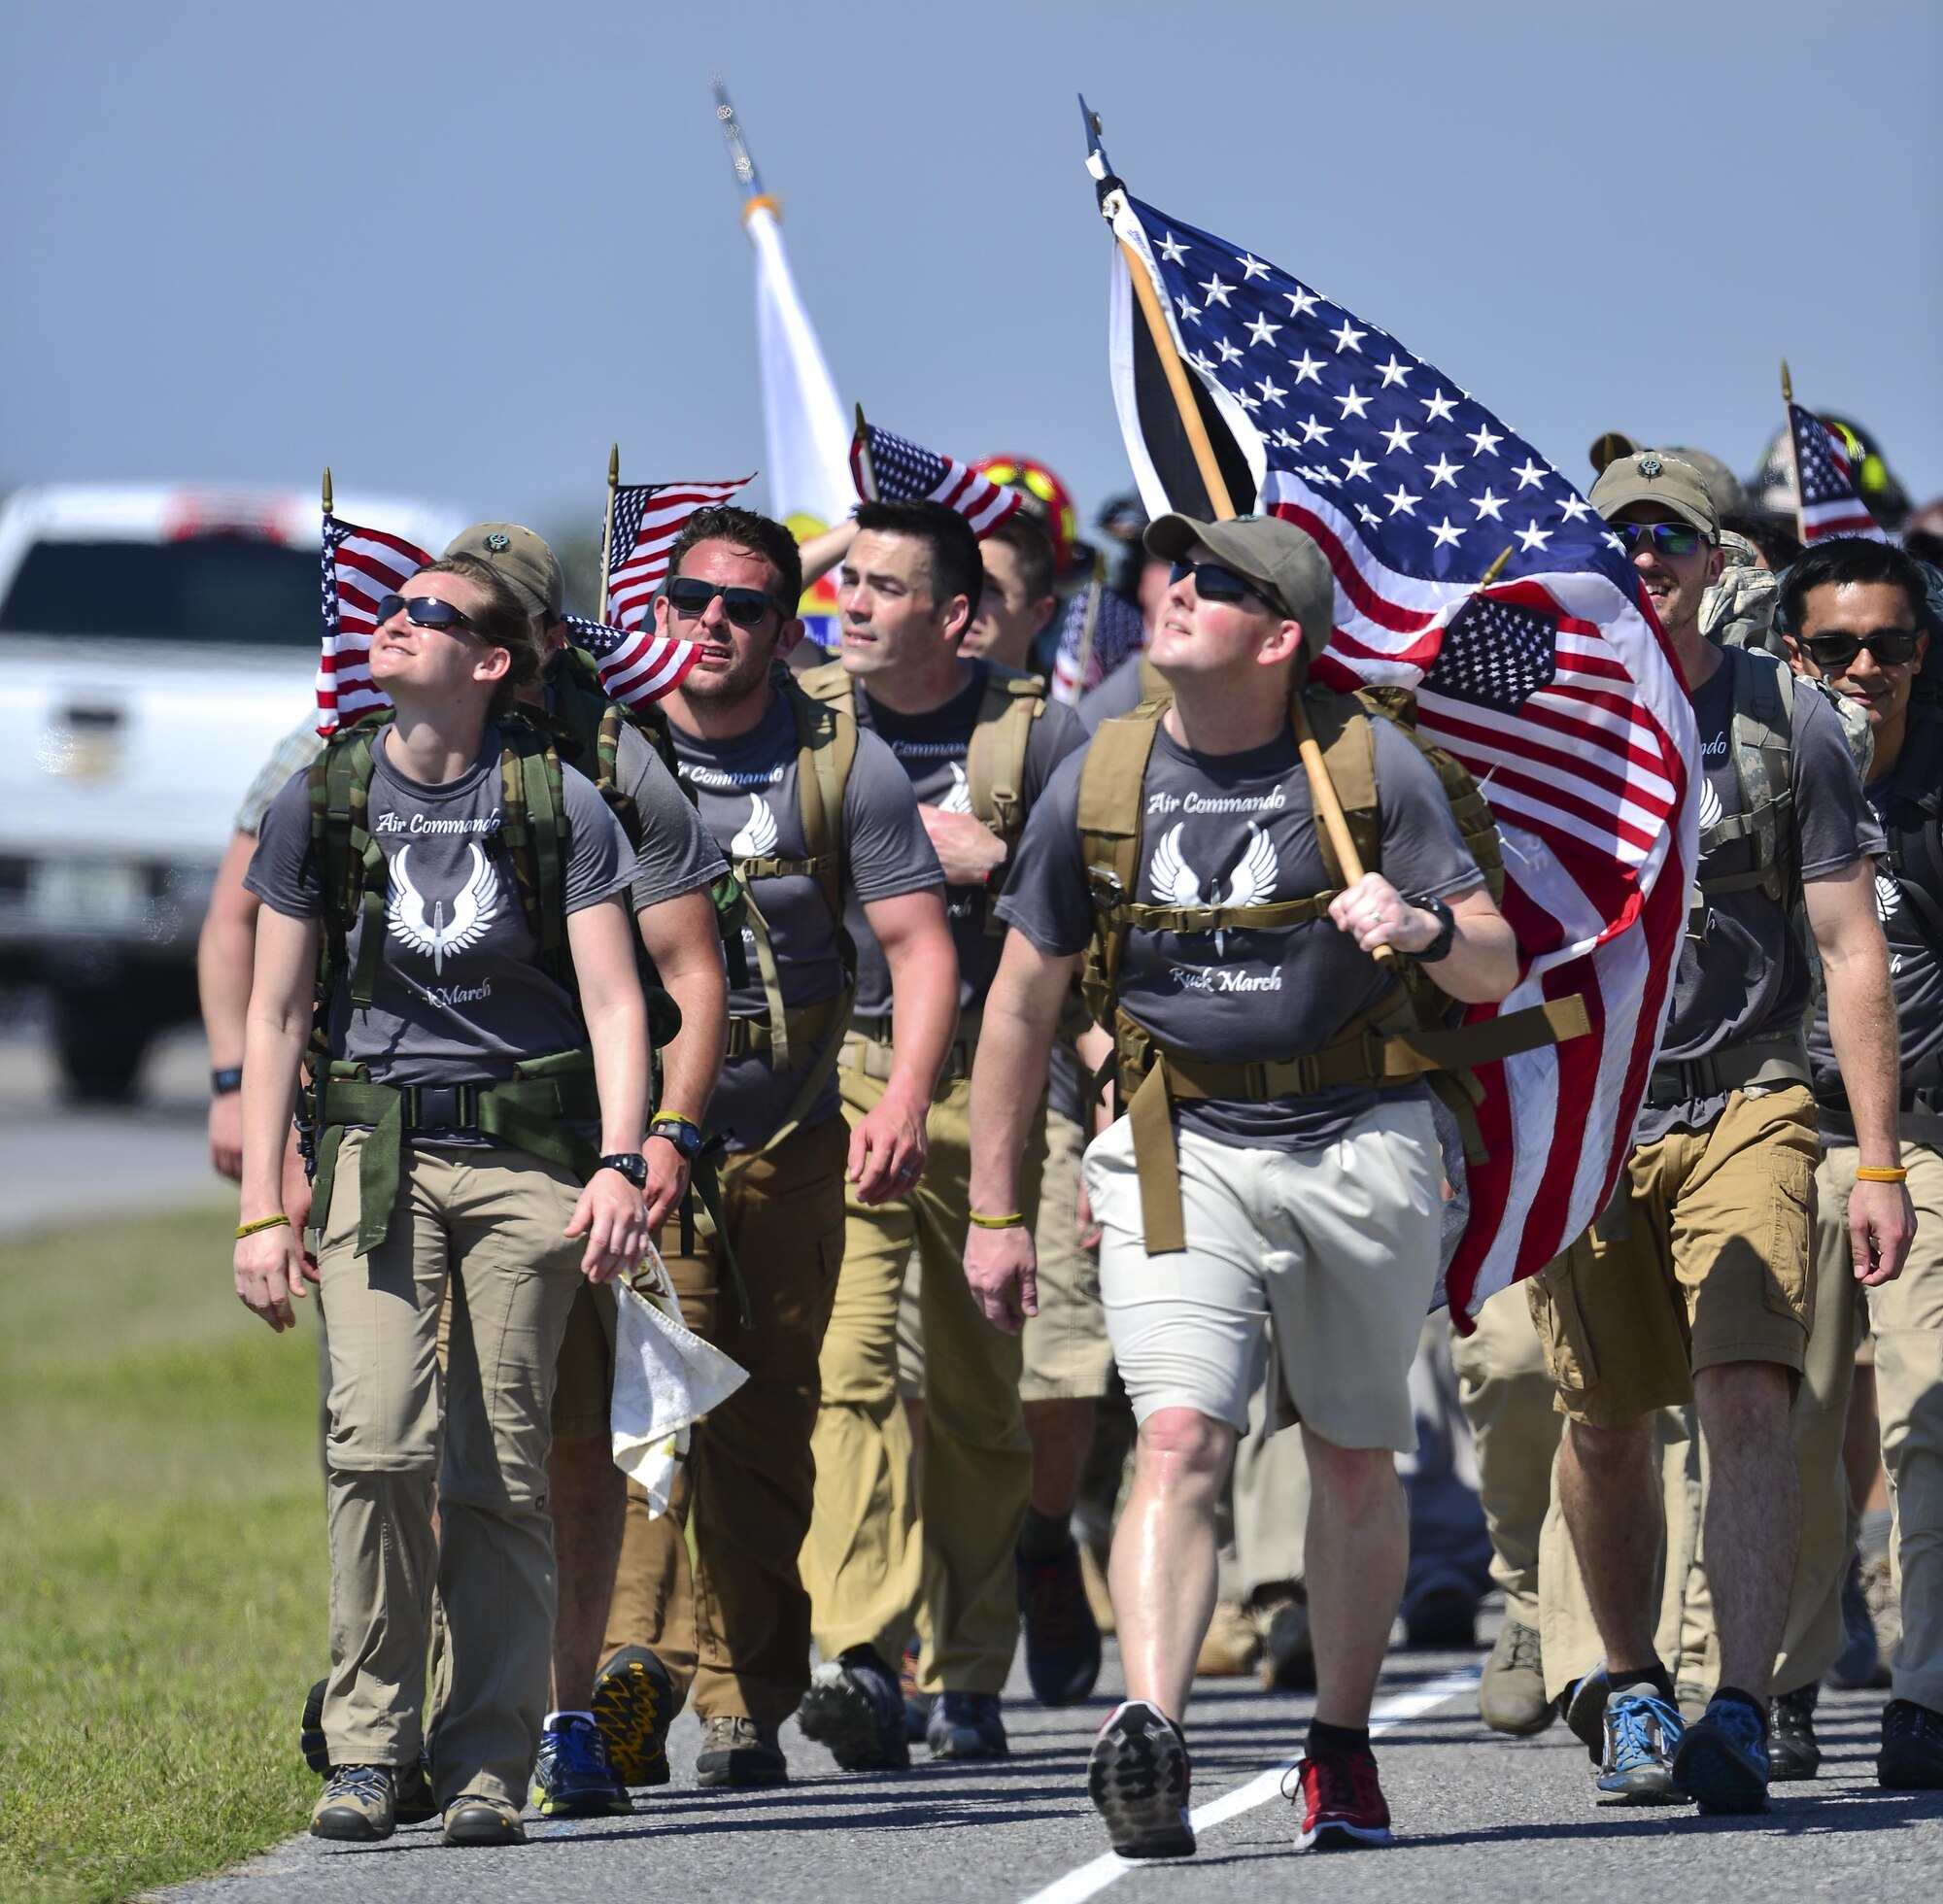 Air Commando Ruckers look at an aircraft on Hurlburt Field, Fla., March 20, 2014. The Air Commando Ruckers carried flags with the names of the seven fallen Marine Special Operations Command members and four Army National Guard members during a 450-mile ruck march from MacDill Air Force Base, Fla. to Hurlburt Field. (U.S. Air Force photo/Airman 1st Class Jeff Parkinson)